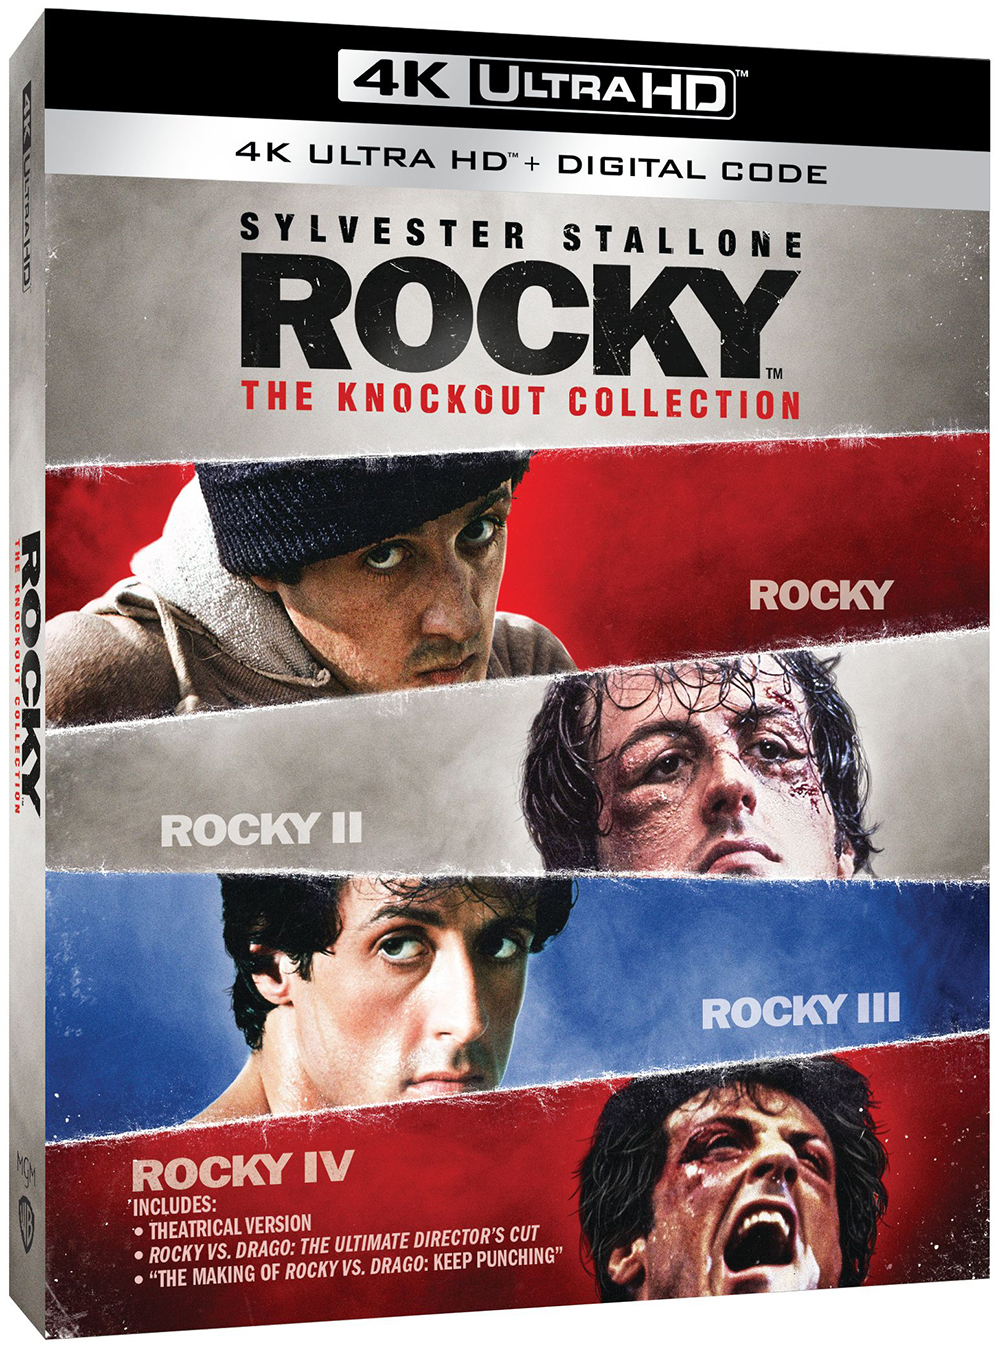 Recut of Rocky IV could lead to Stallone fashioning a TV prequel of the  franchise that can't die - The Ring